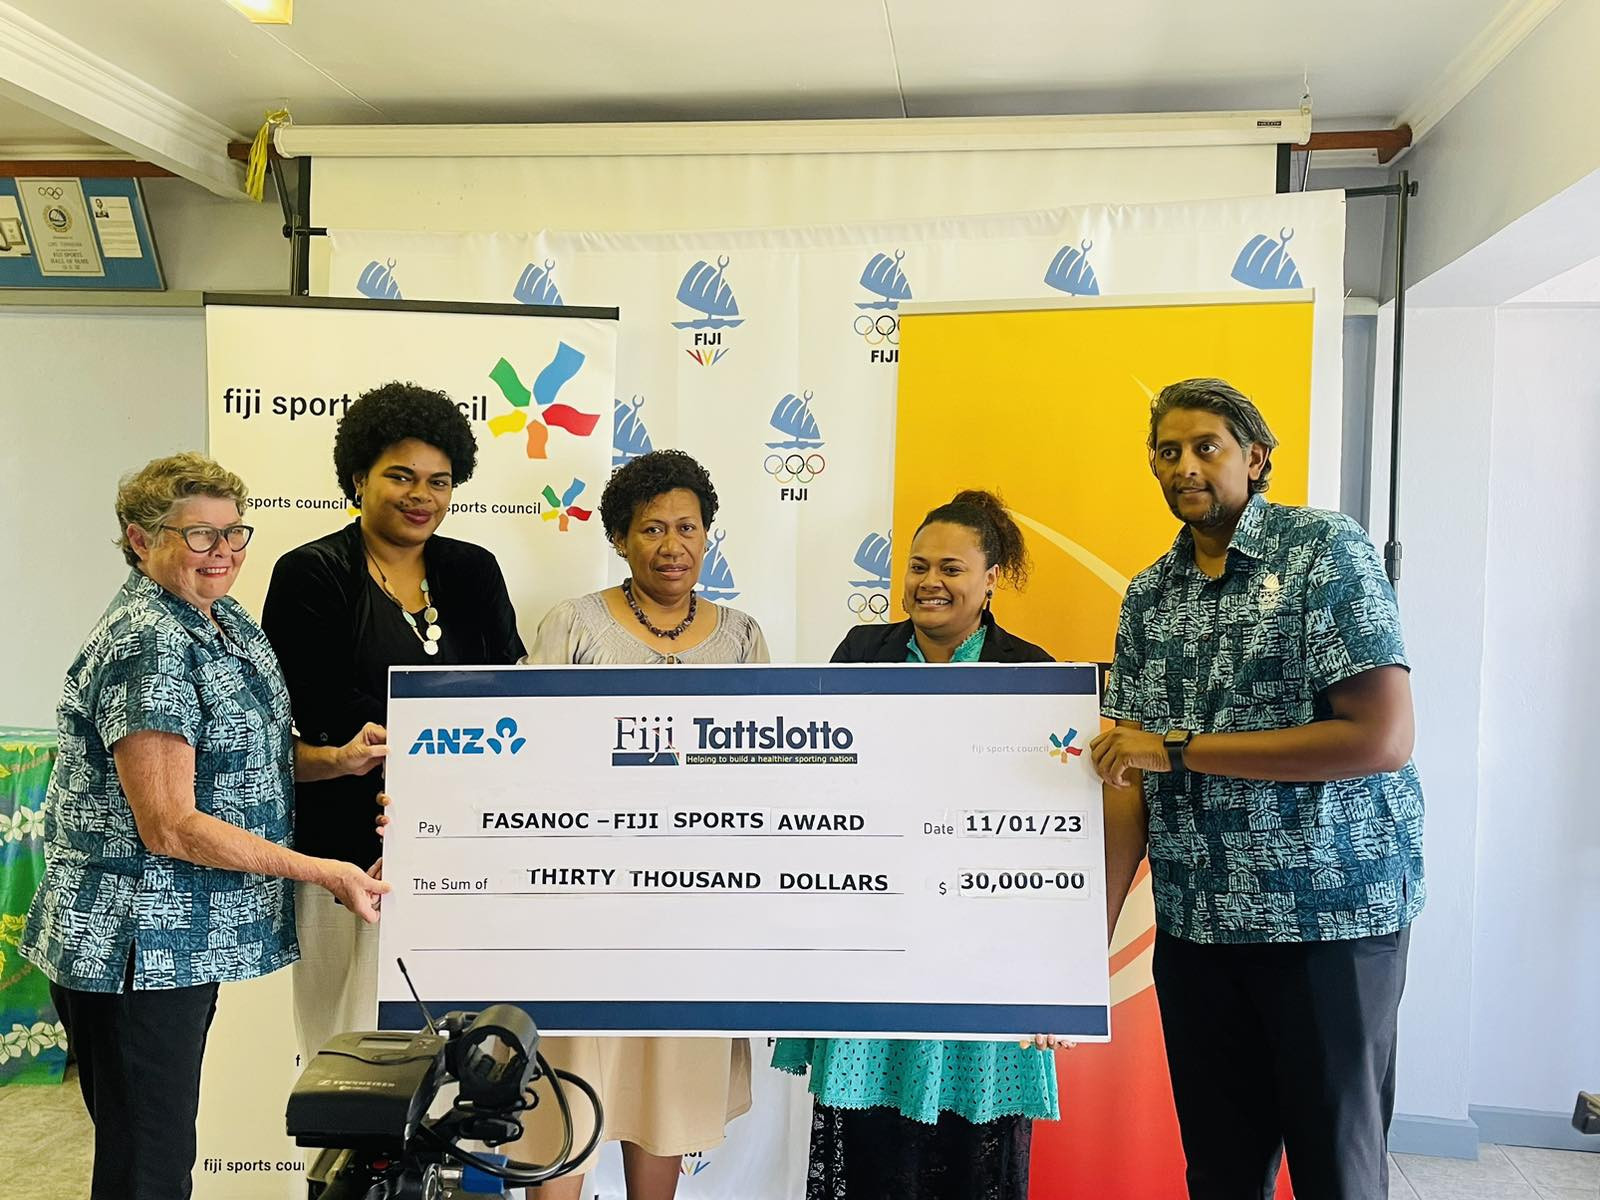 FASANOC to chair Fiji Sports Awards in March 